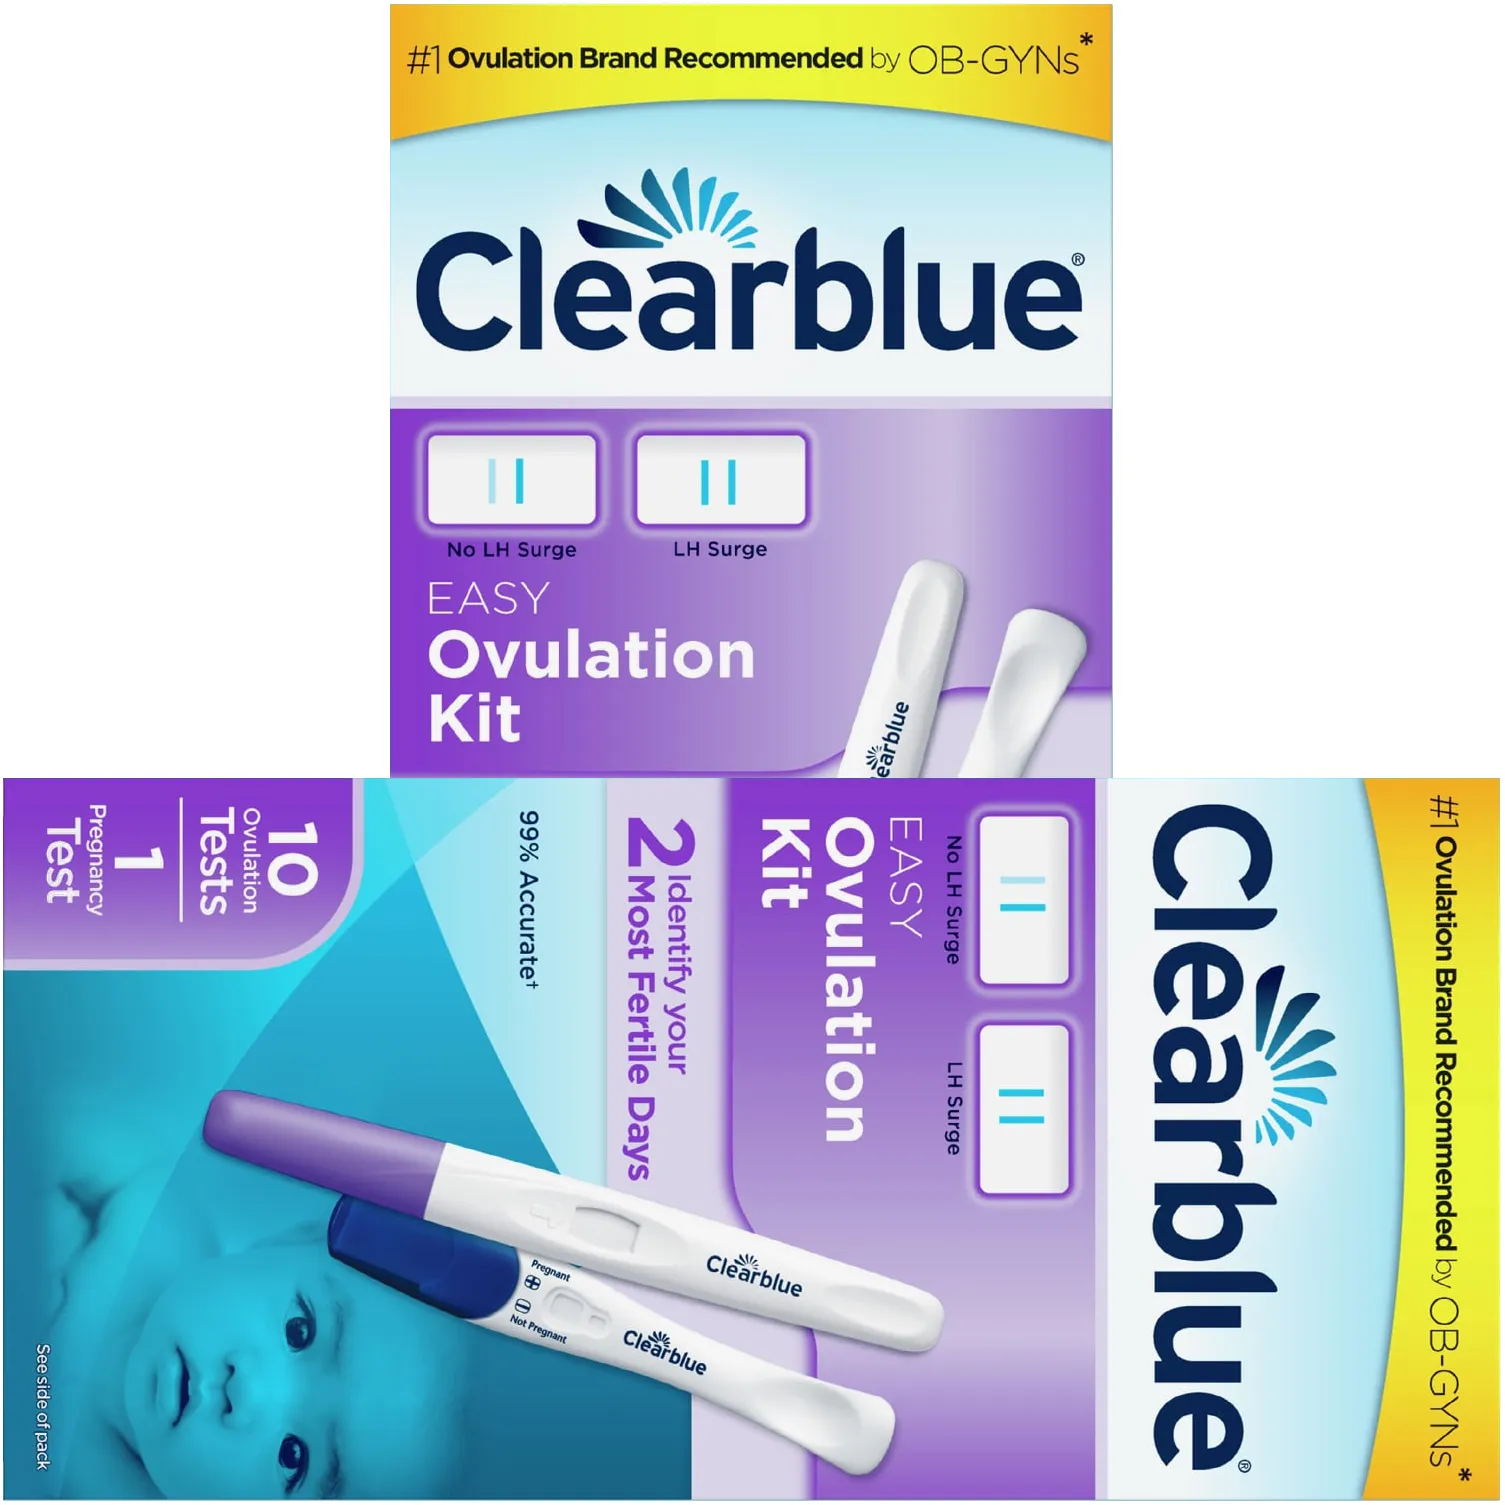 Free Clearblue Ovulation Test